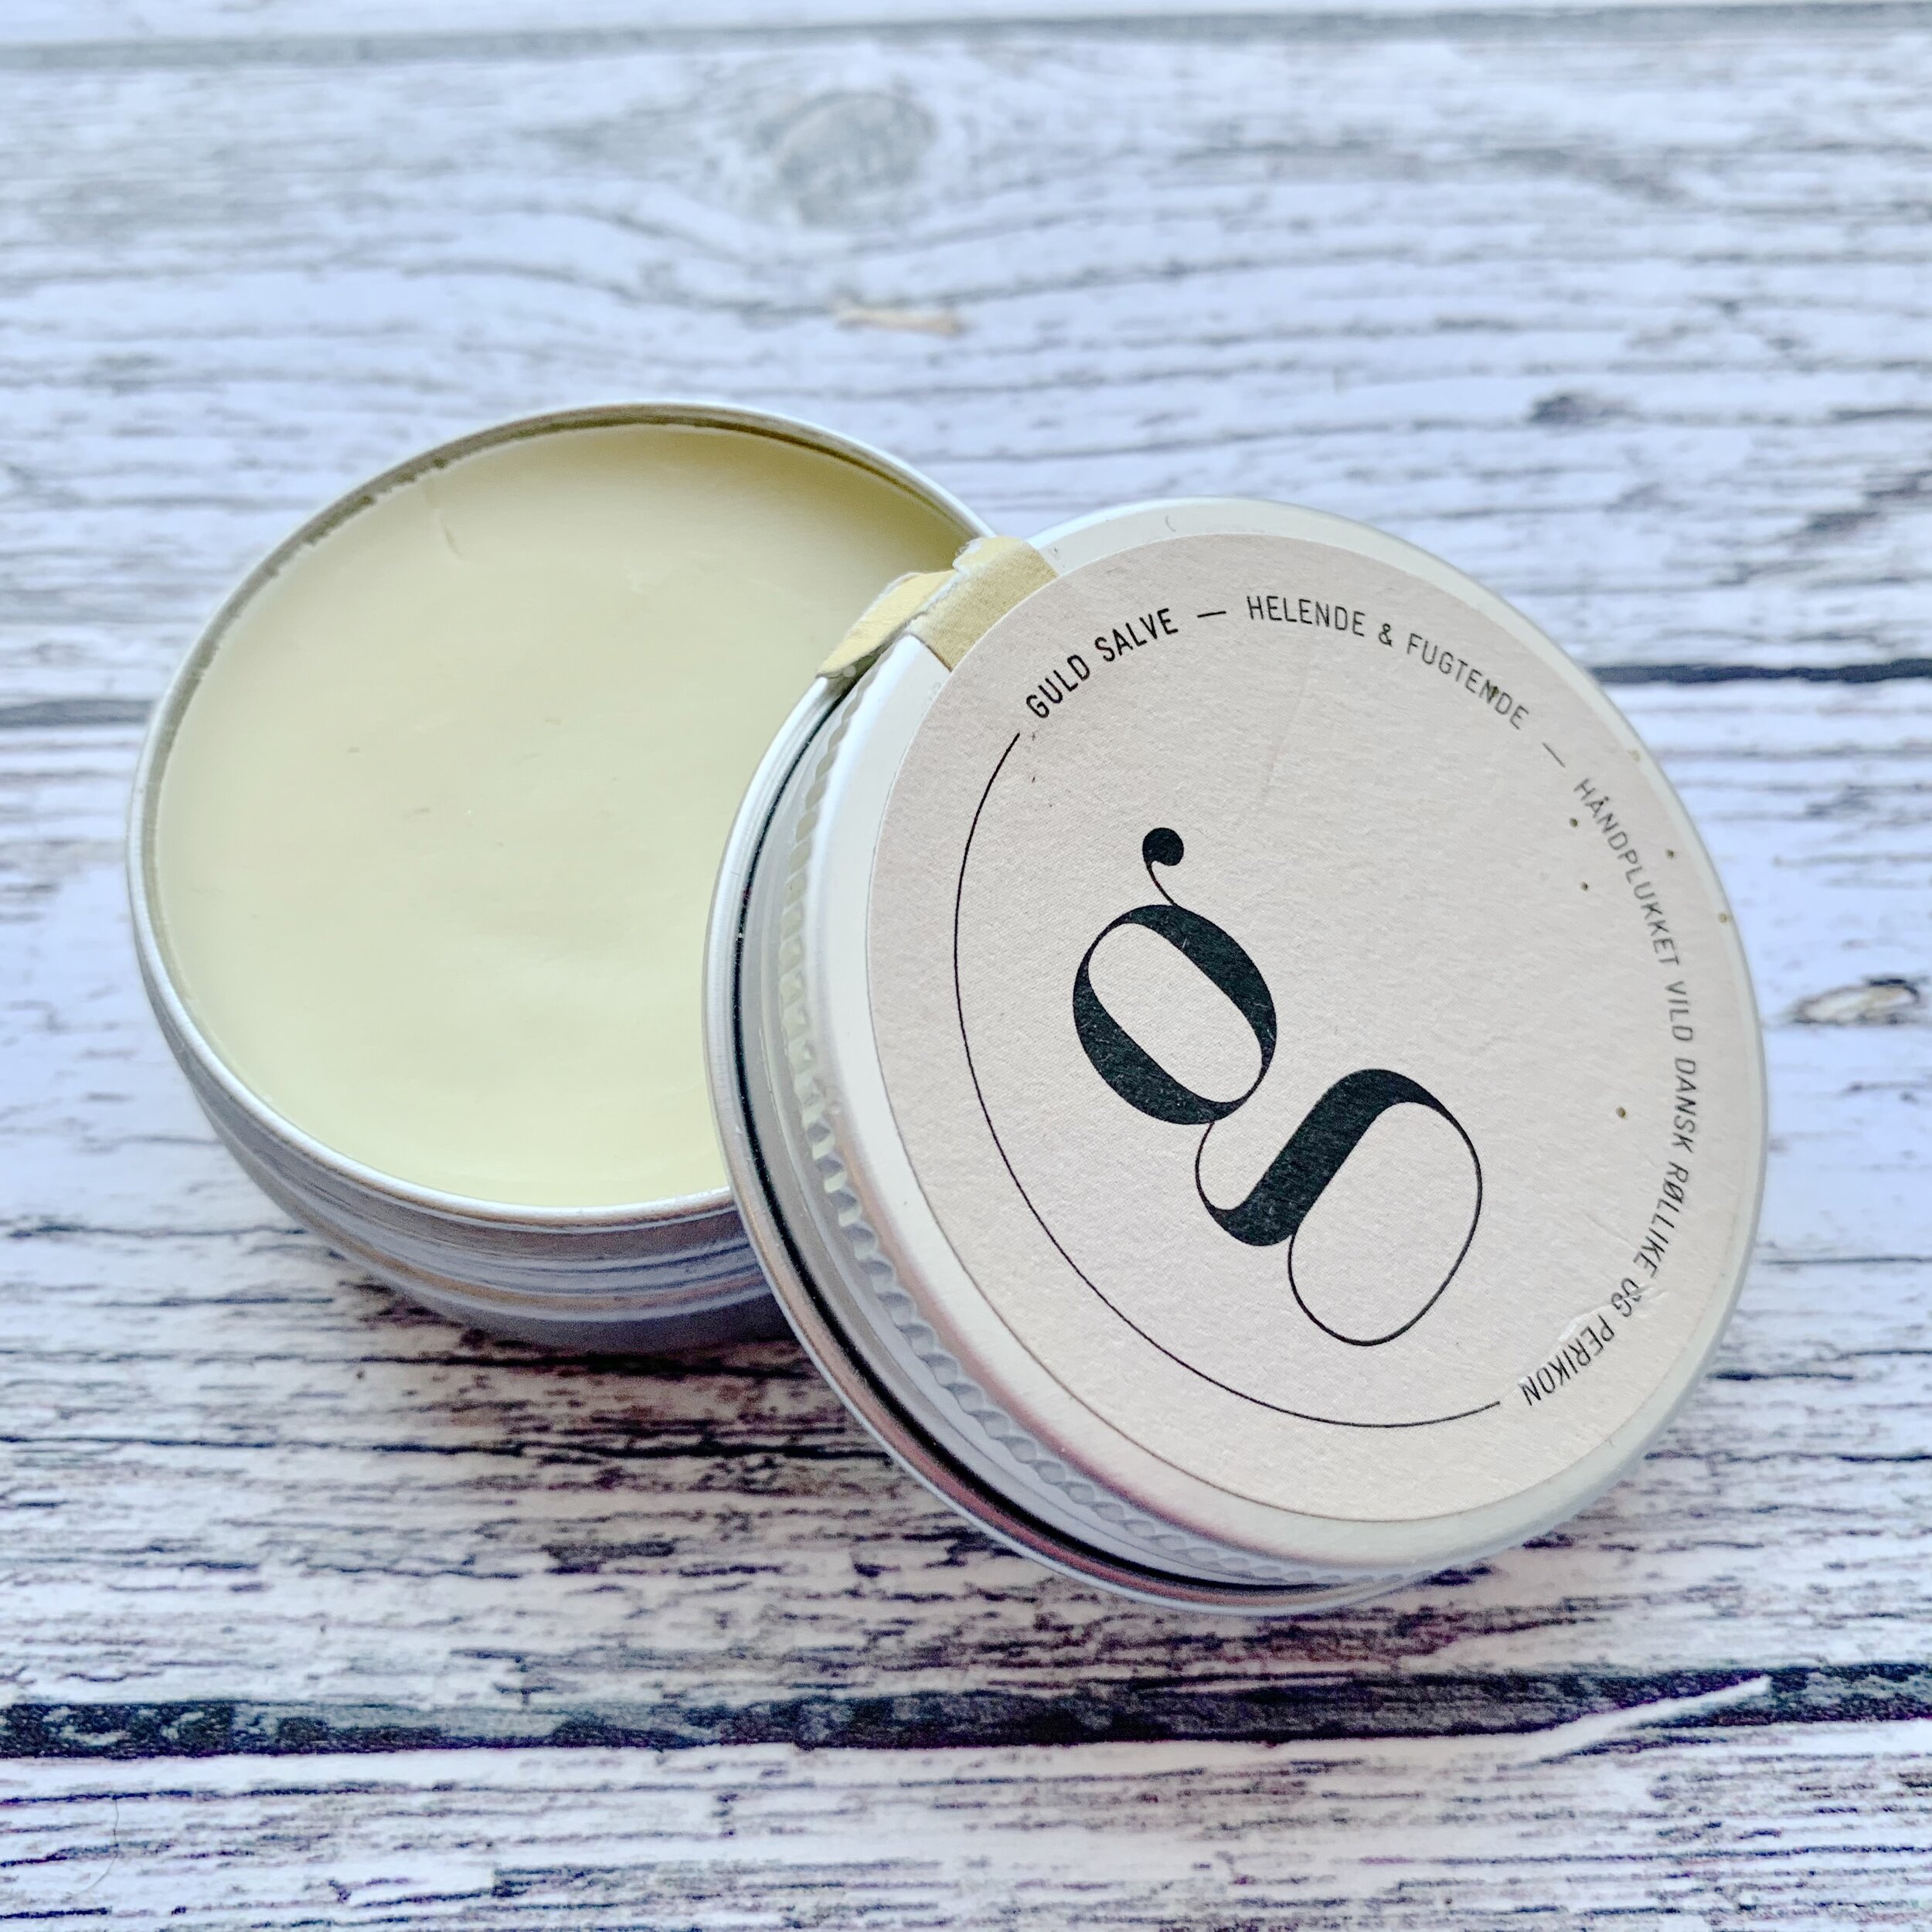 Danish lilac and St John's Wort Hand Balm from G-uld